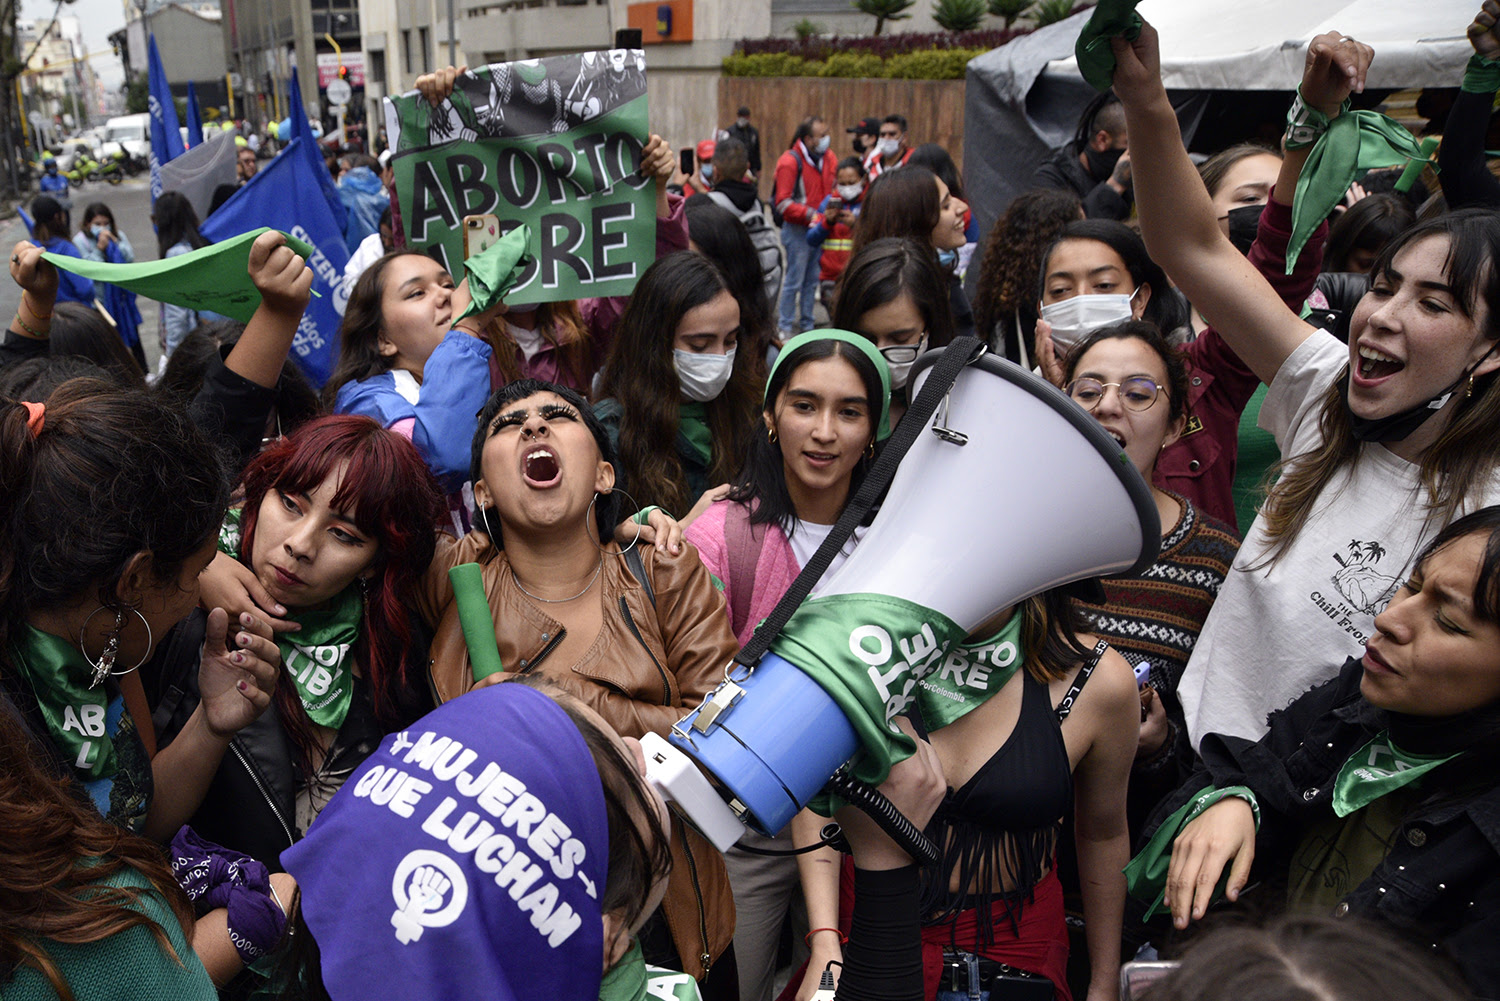 Abortion rights demonstrators celebrate outside the Palace of Justice in Bogotá, Colombia, after the Colombian Constitutional Court voted in favor of decriminalizing abortion up to 24 weeks of gestation on Feb. 21. GUILLERMO LEGARIA SCHWEIZER/GETTY IMAGES